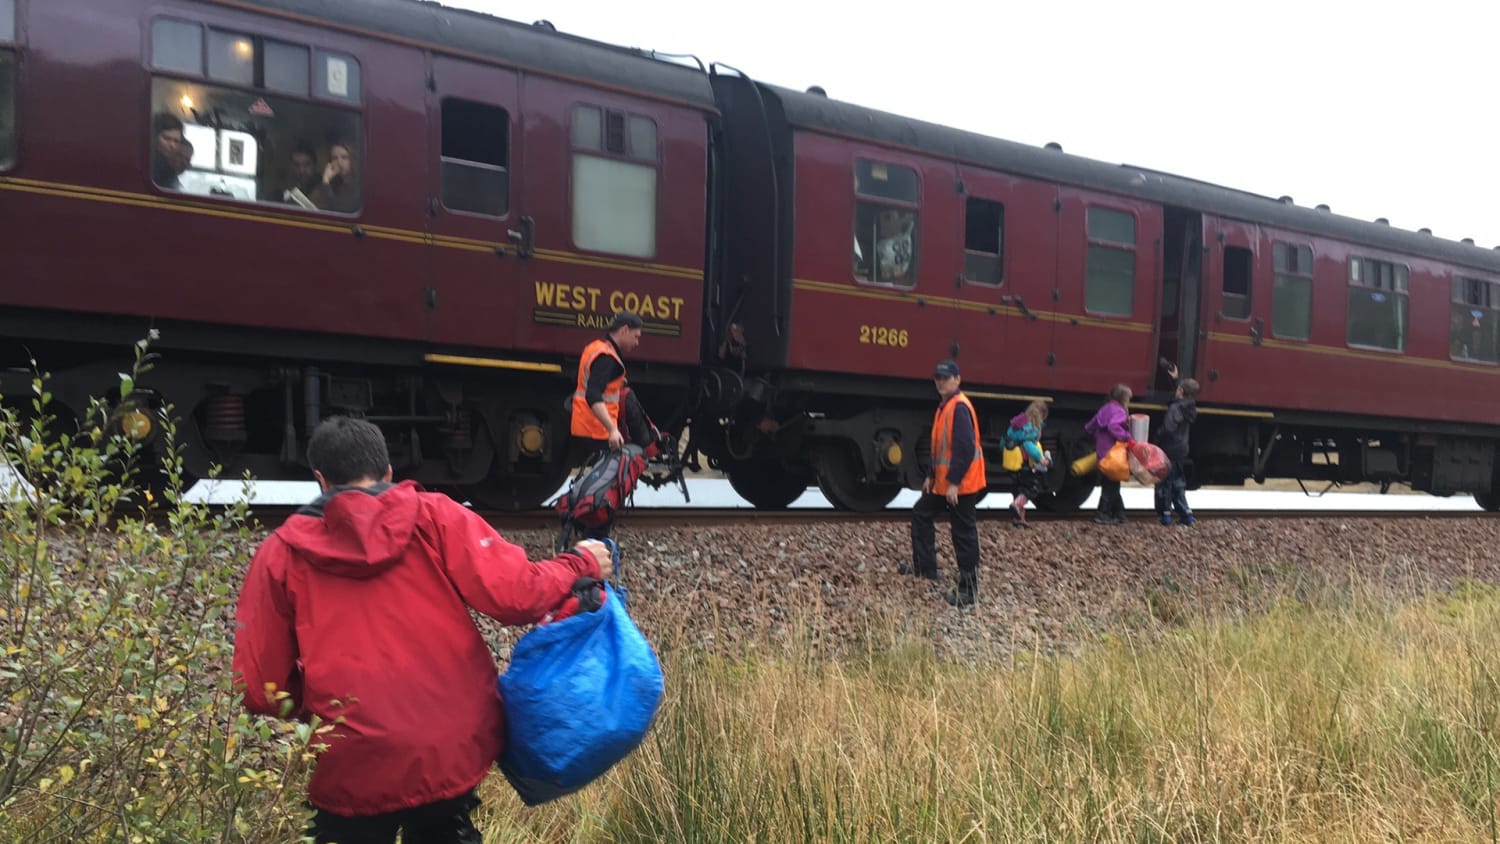 Hogwarts Express train rescues family stranded in Scotland - TODAY.com